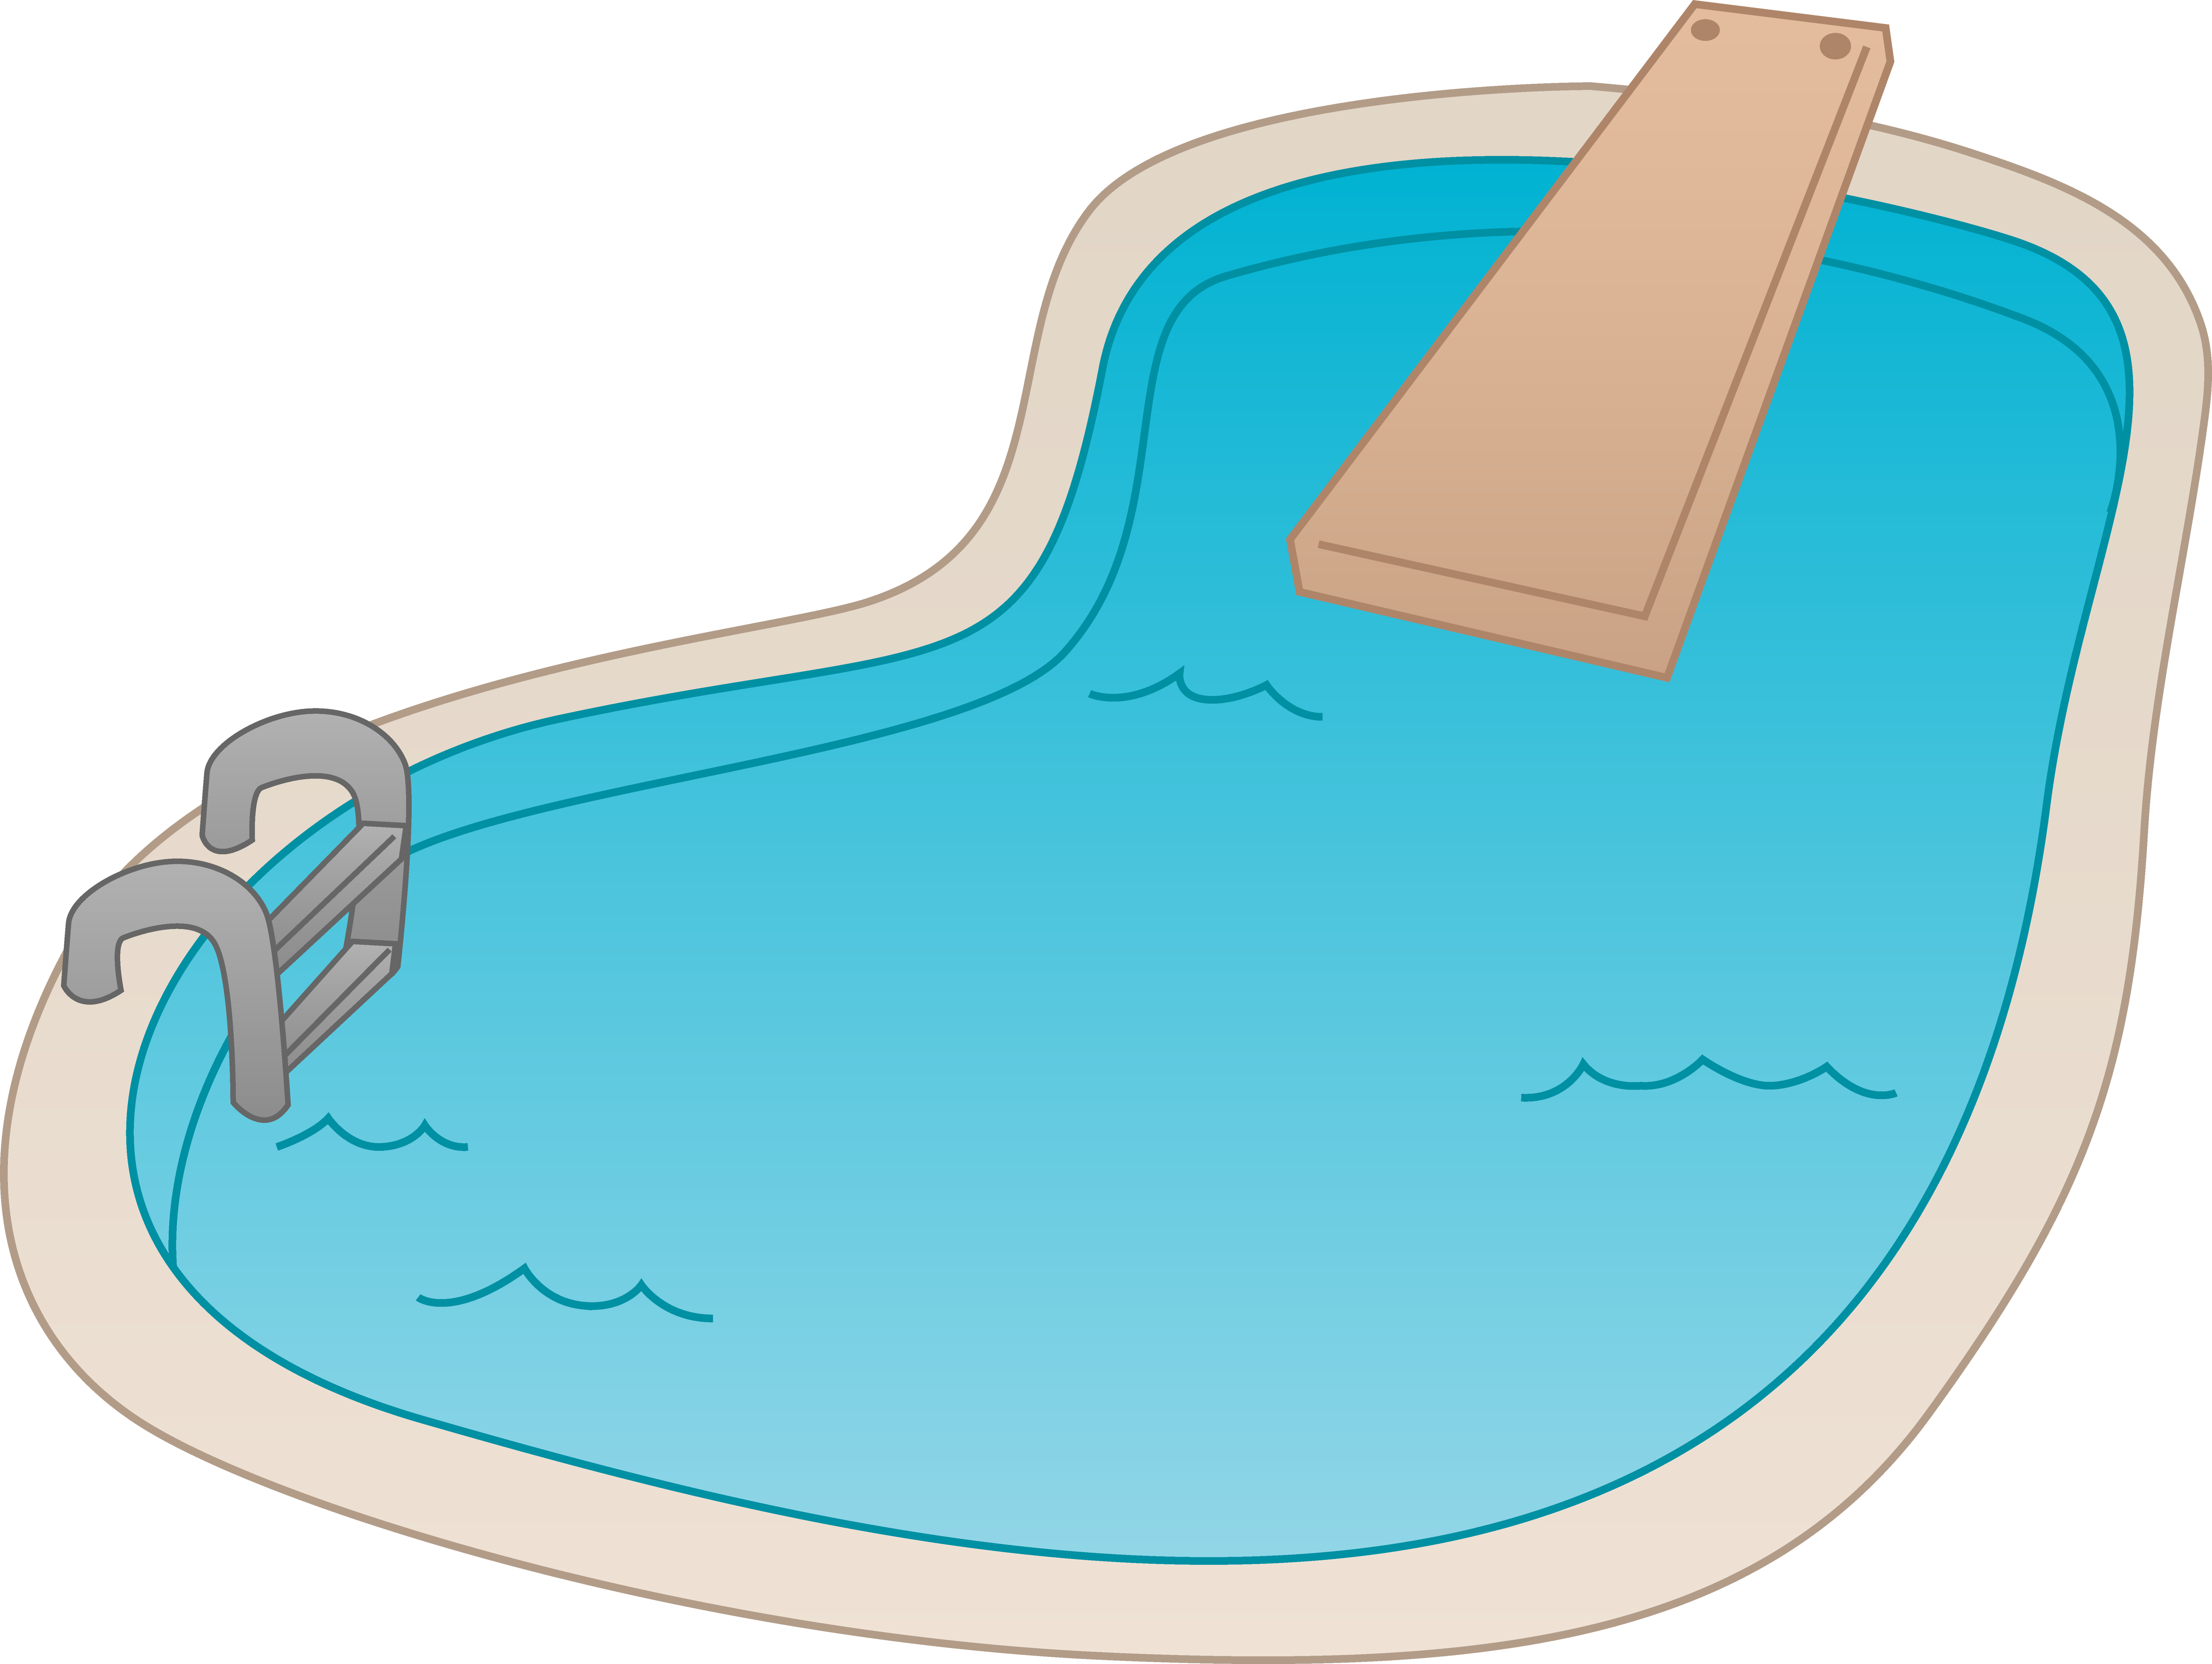 Swimming Pool Cartoon Images Clipart - Free to use Clip Art Resource